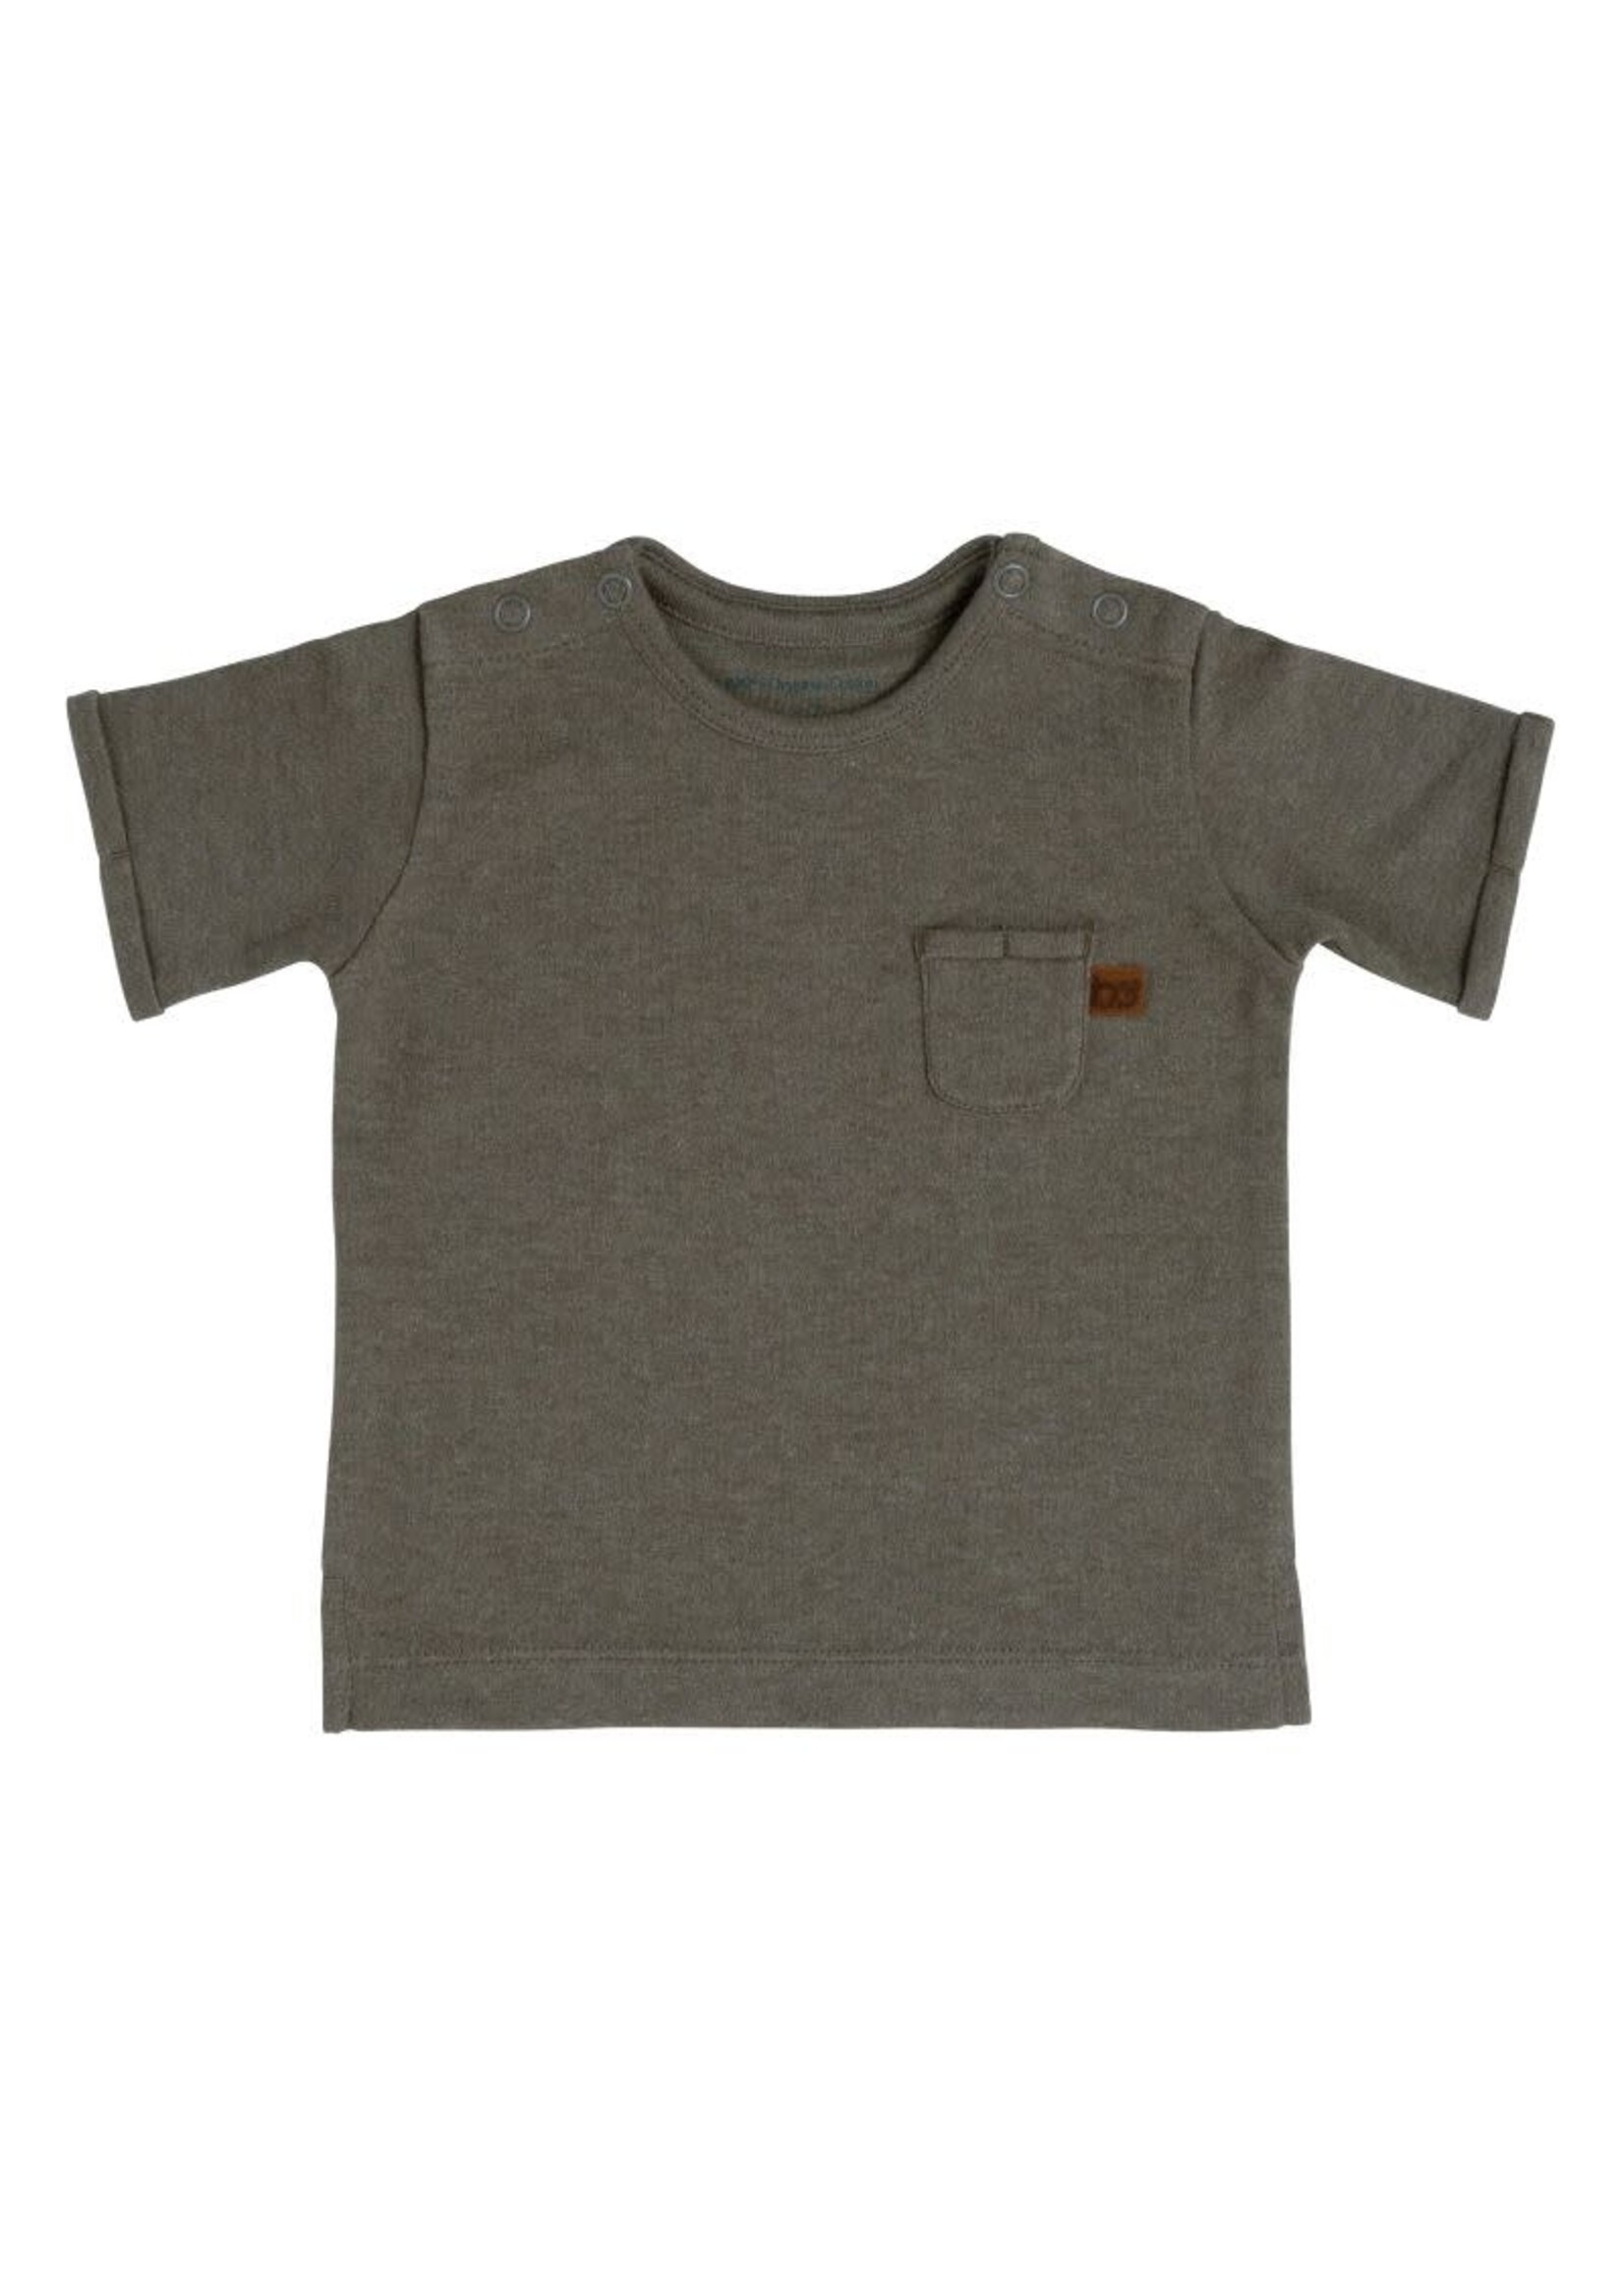 Baby's Only Baby's Only Melange Khaki T-shirt